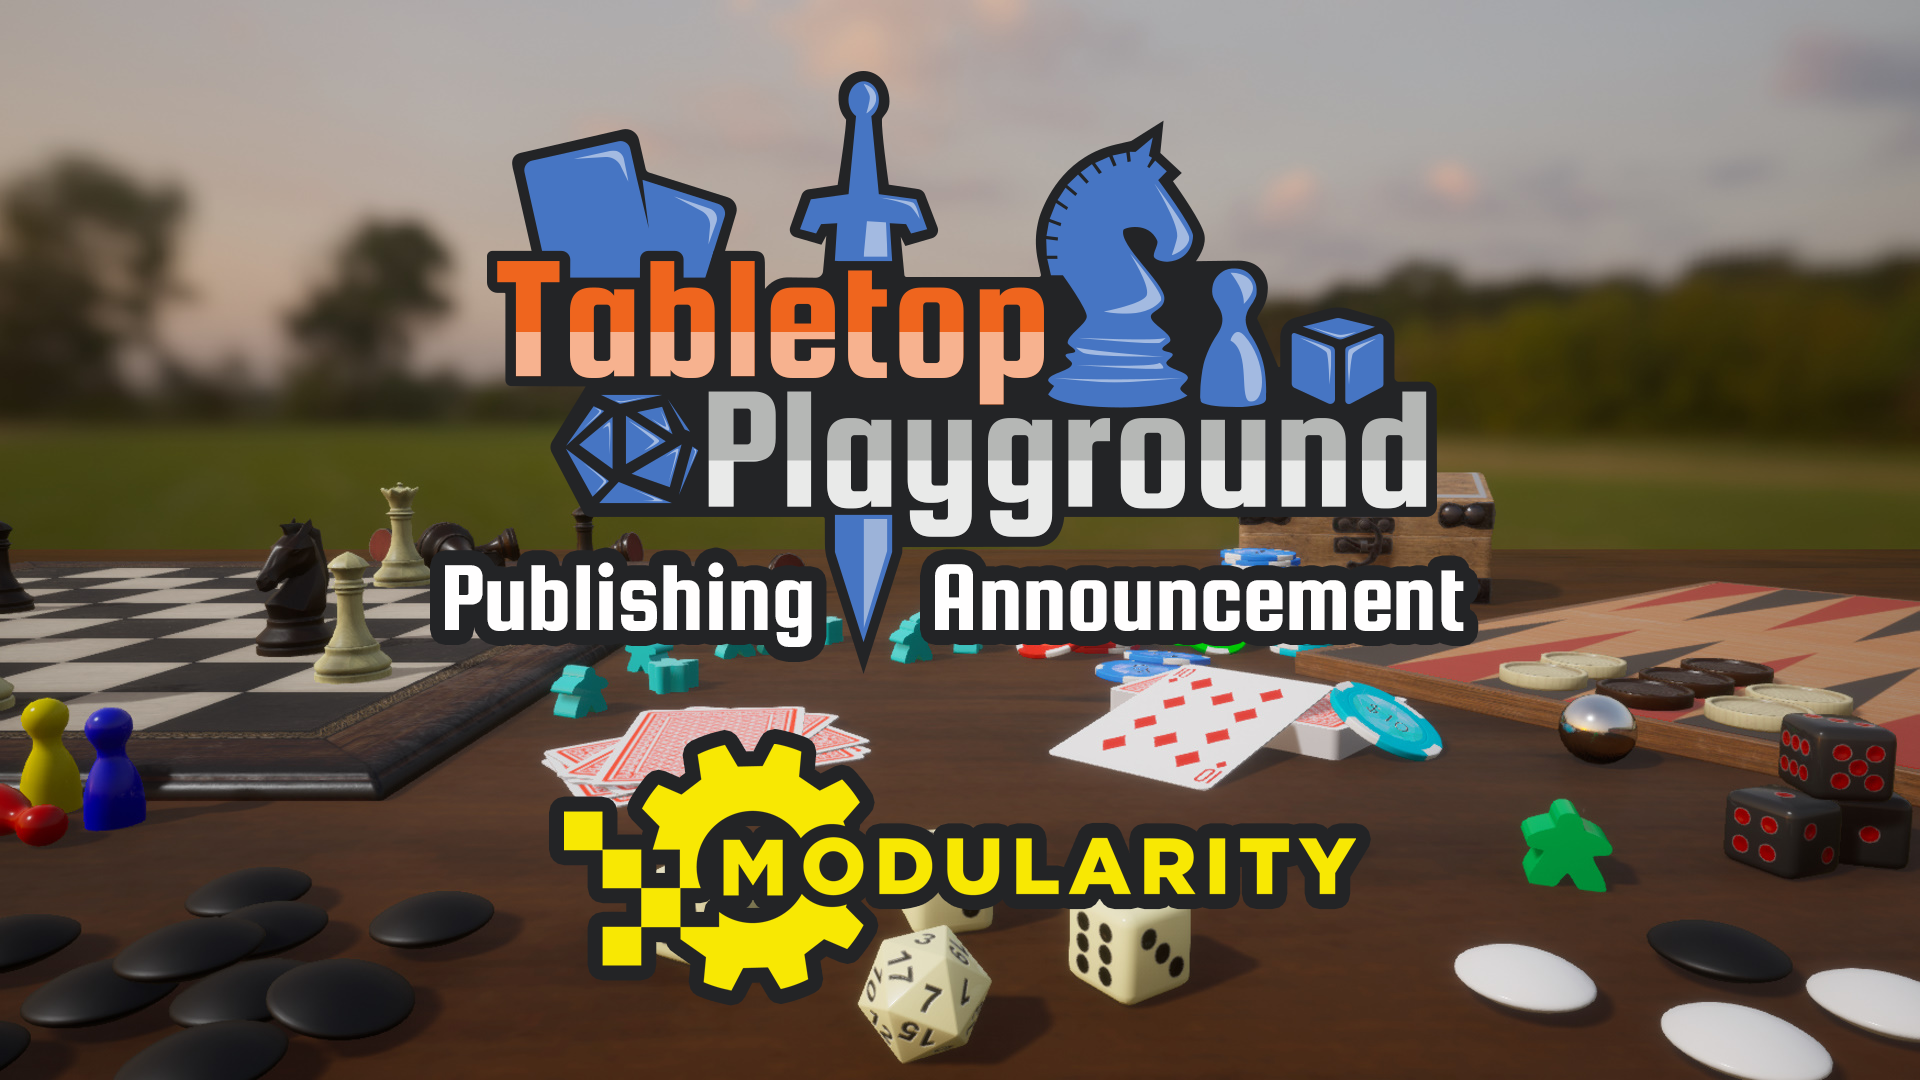 Tabletop Playground download the new for ios